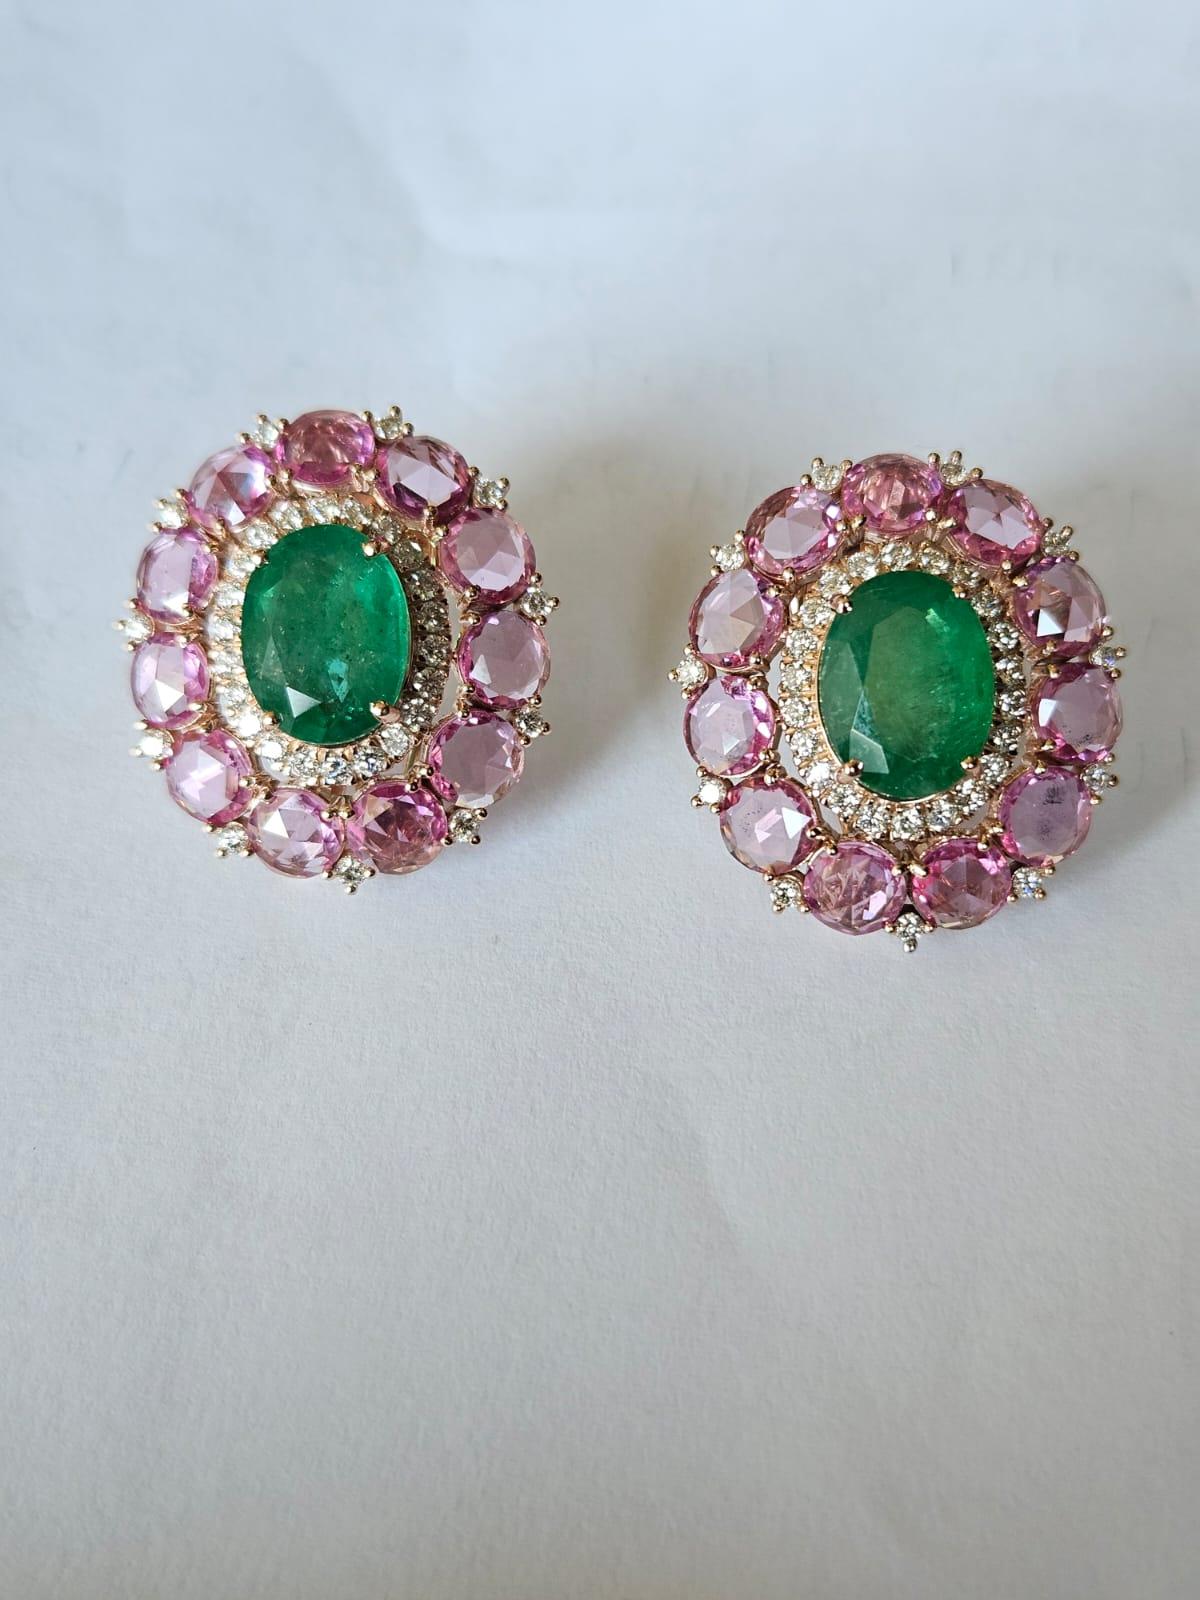 Rose Cut 6.75 carats, natural Zambian Emerald, Pink Sapphires & Diamonds Stud Earrings For Sale